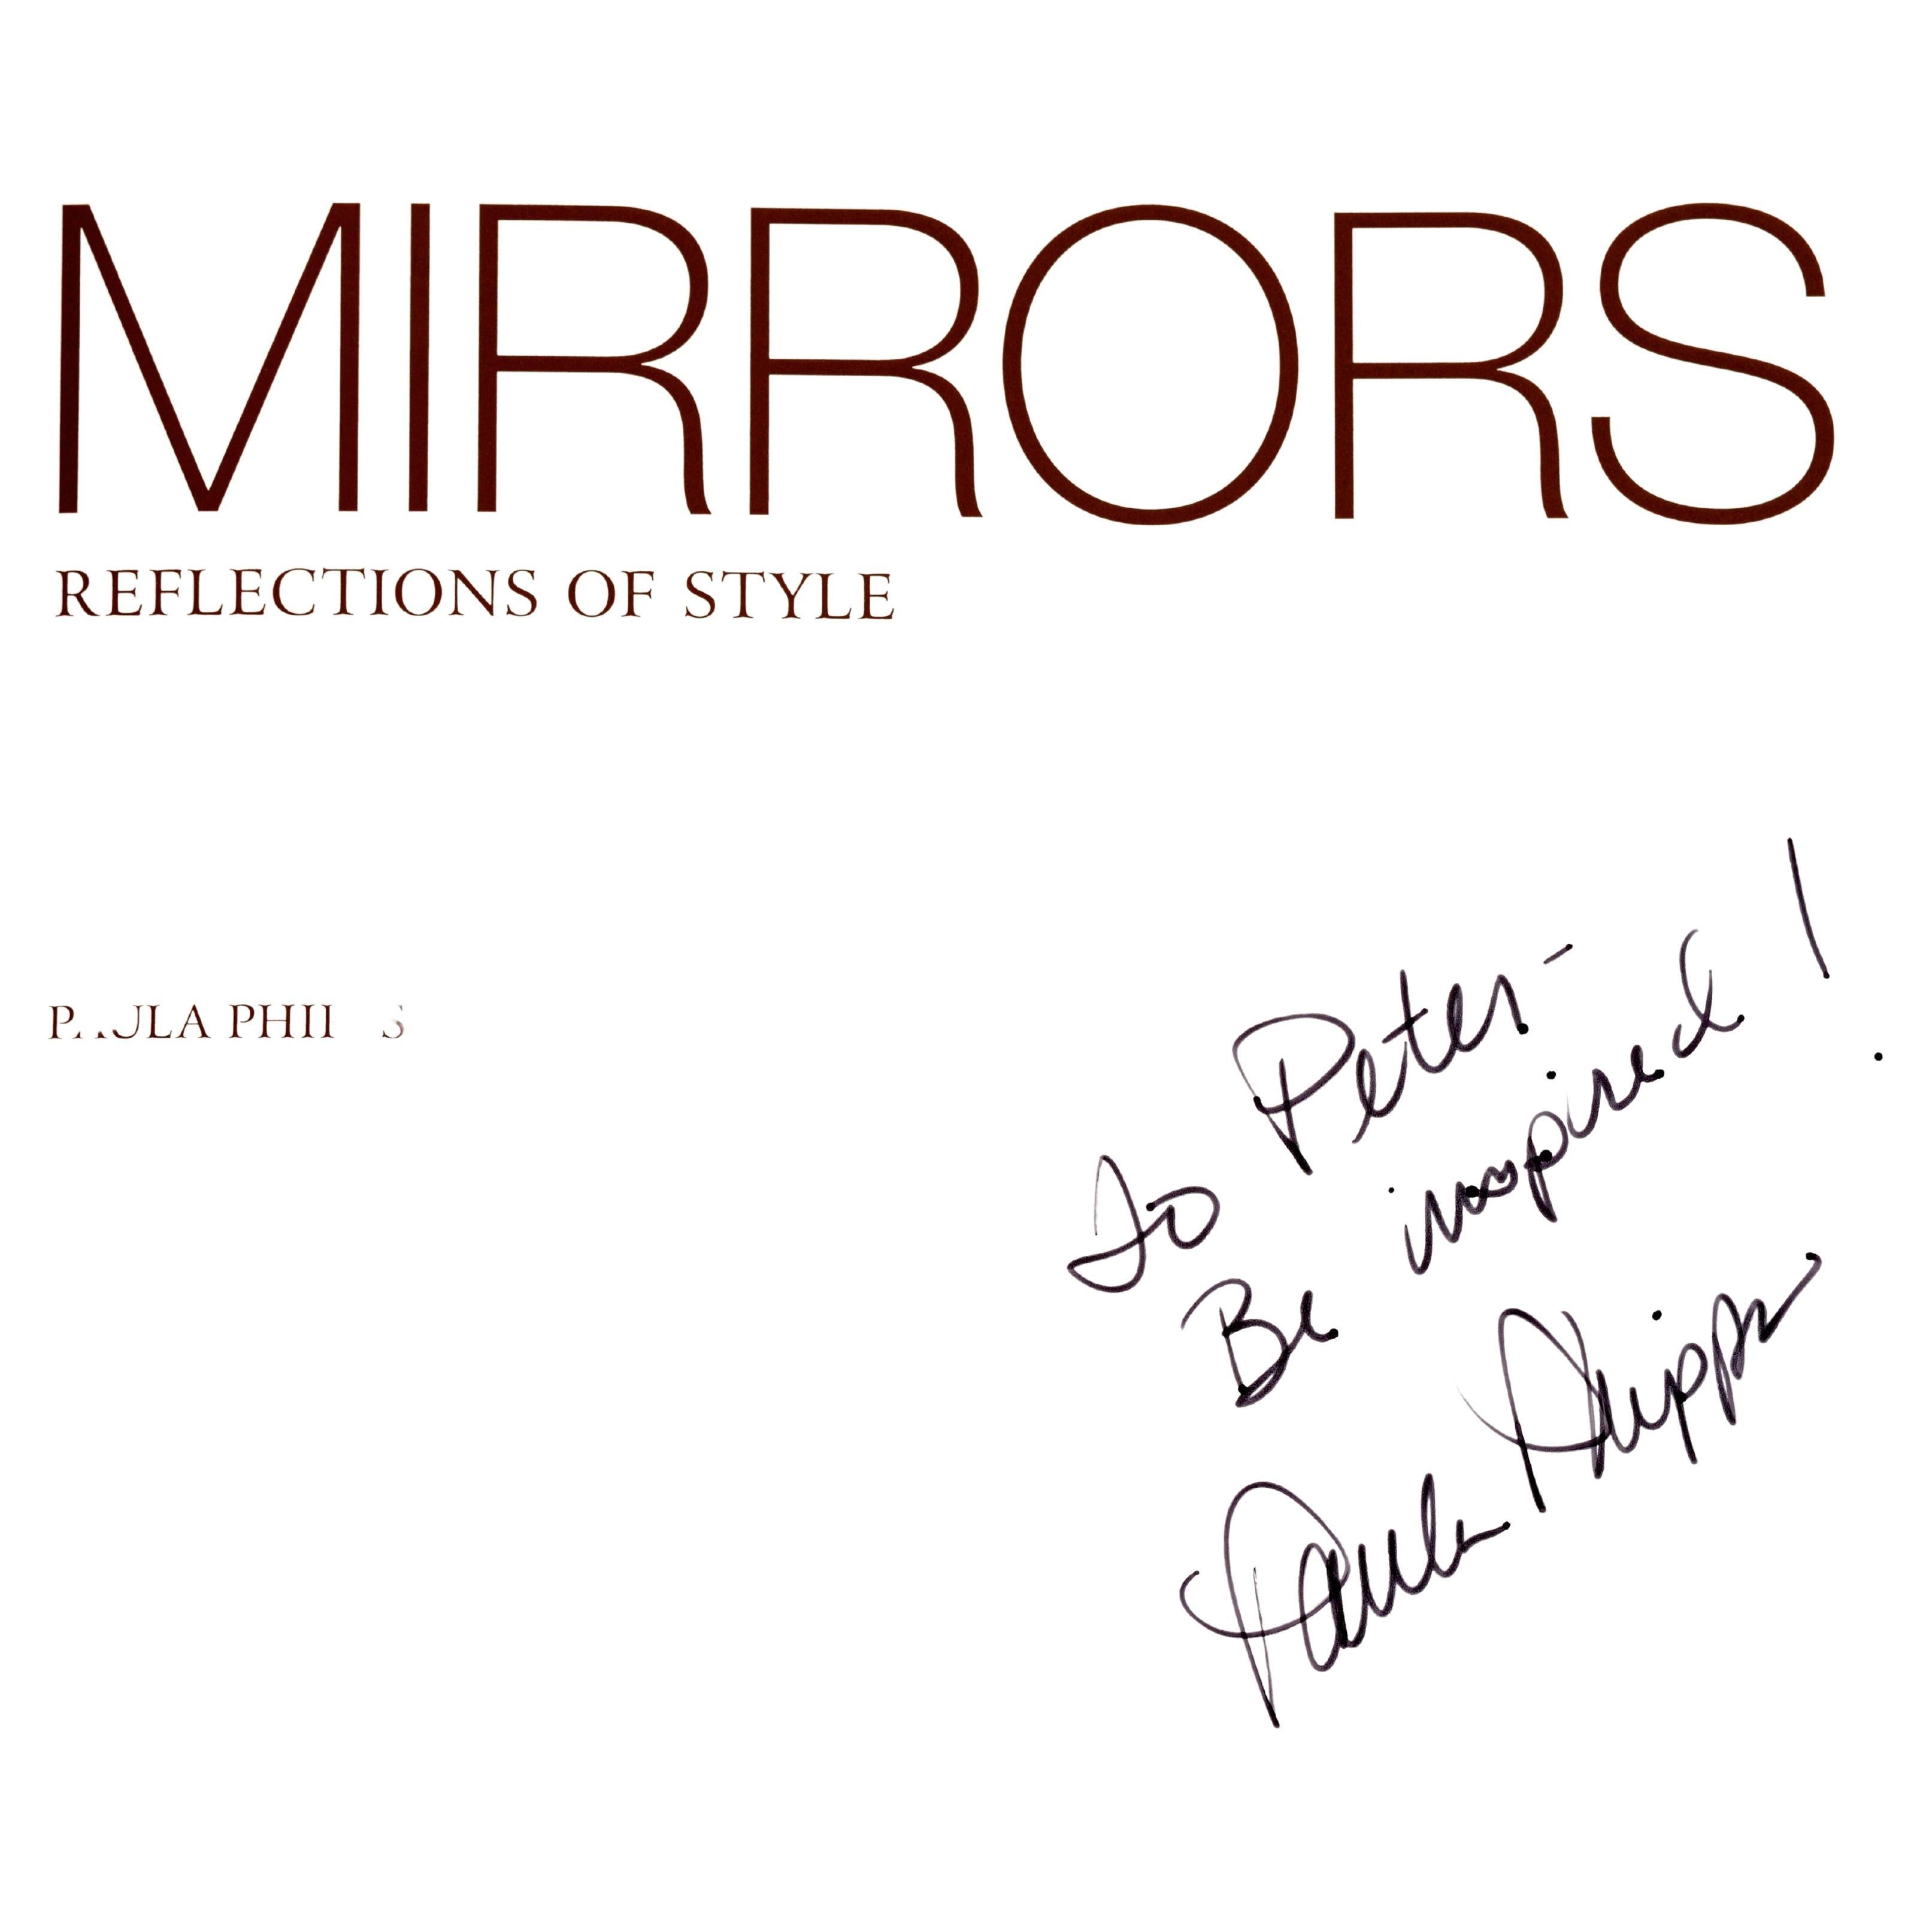 Mirrors: Reflections of Style by Paula Phipps. Publisher; WW Norton & Co, NY, 2012. Stated 1st Ed hardcover with dust jacket Signed and Inscribed by Author. An ideal resource for anyone designing or re-creating period rooms or studying historical